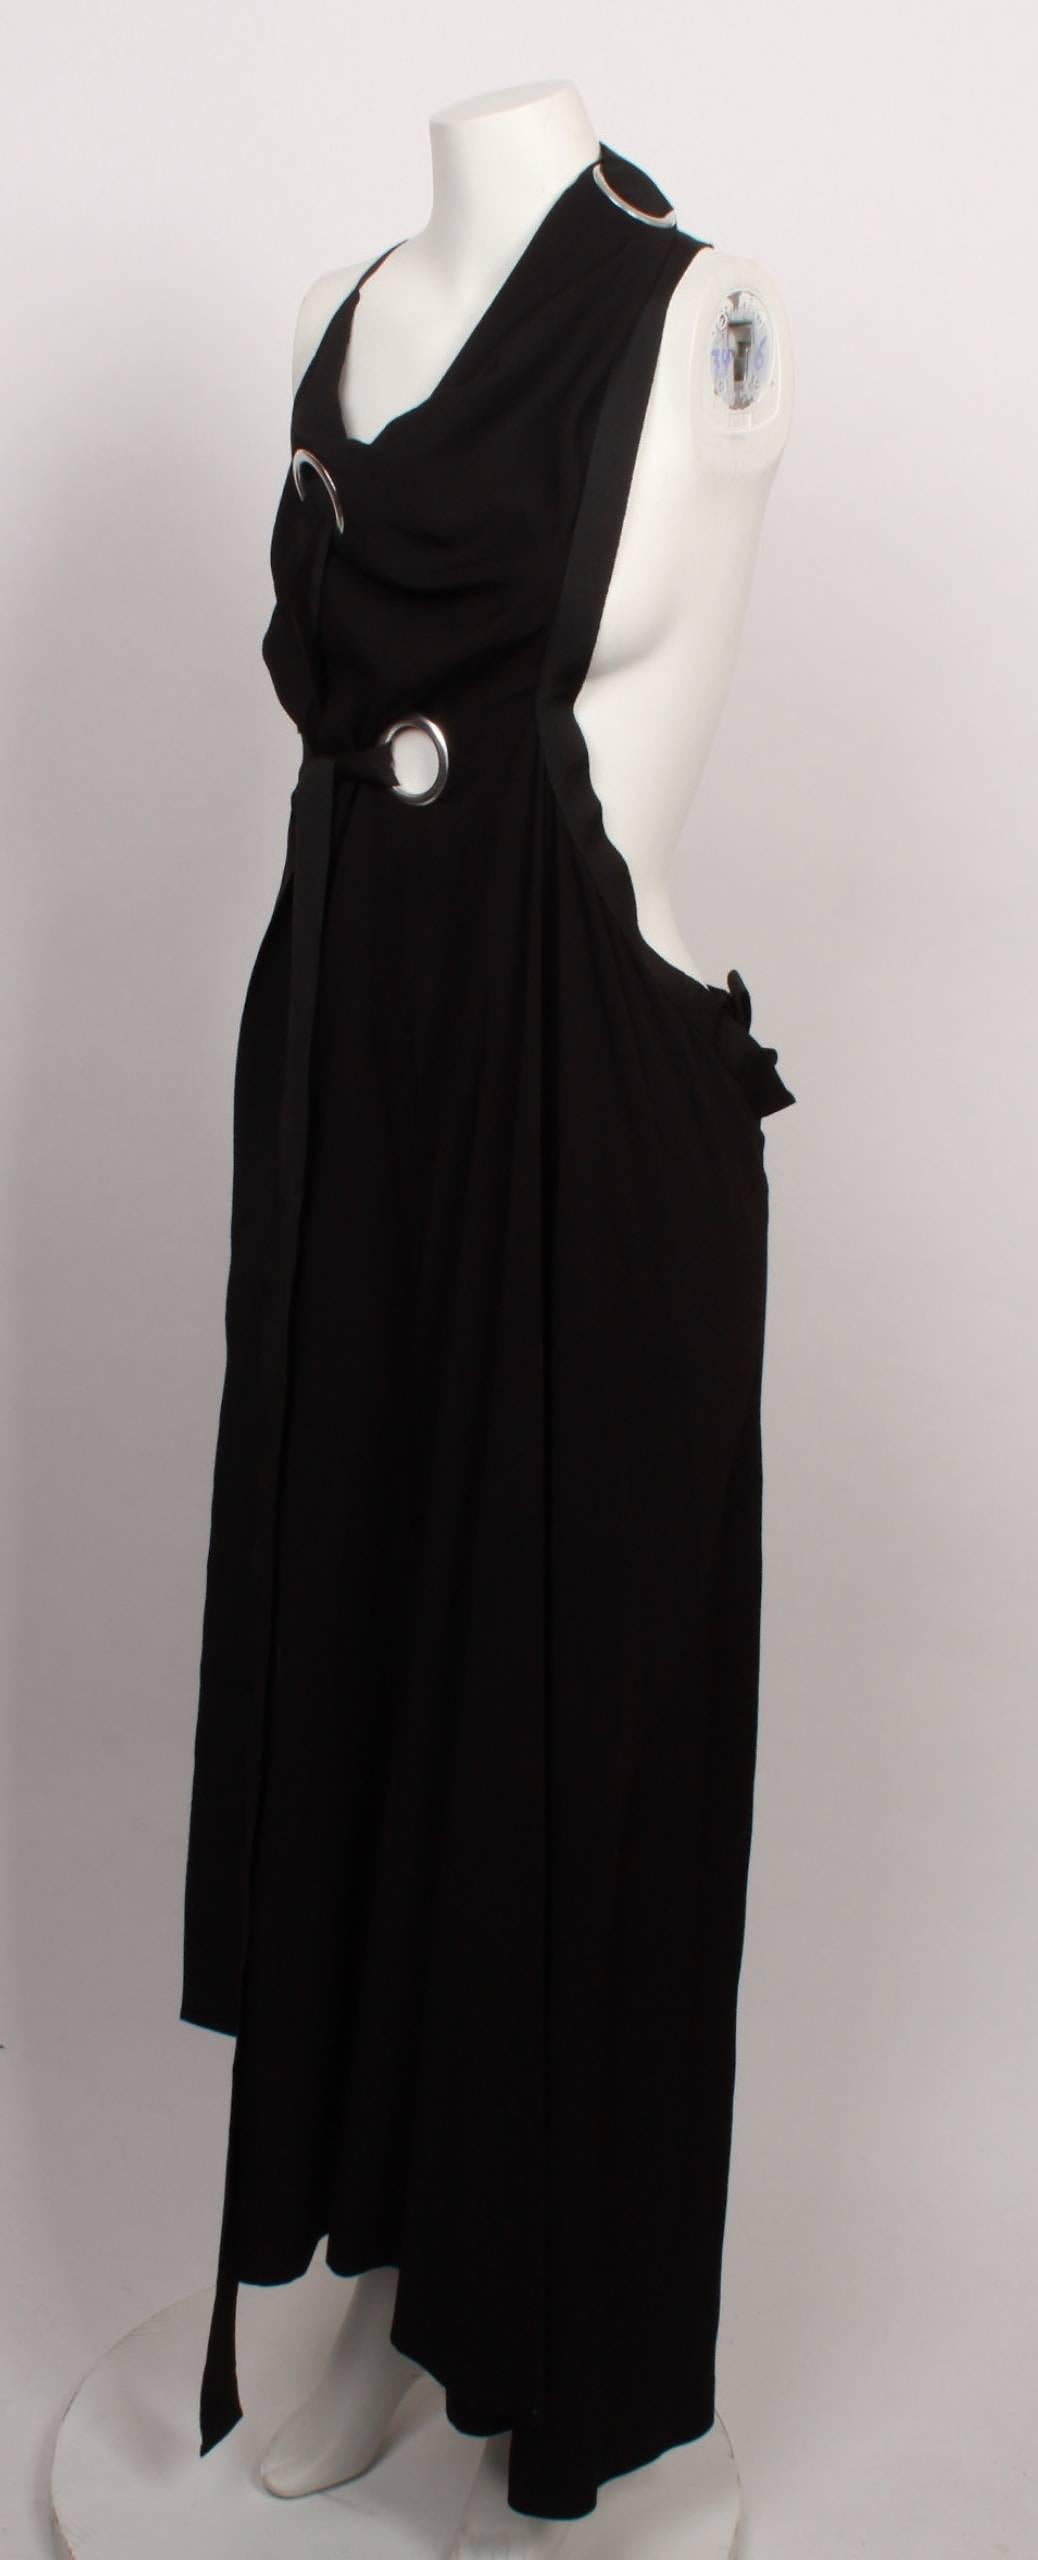 Amazing Yojhi Yamamoto asymmetric eyelet halter gown with oversized nickel eyelets and wide grosgrain ribbon for fastening. Can be worn various ways. 
